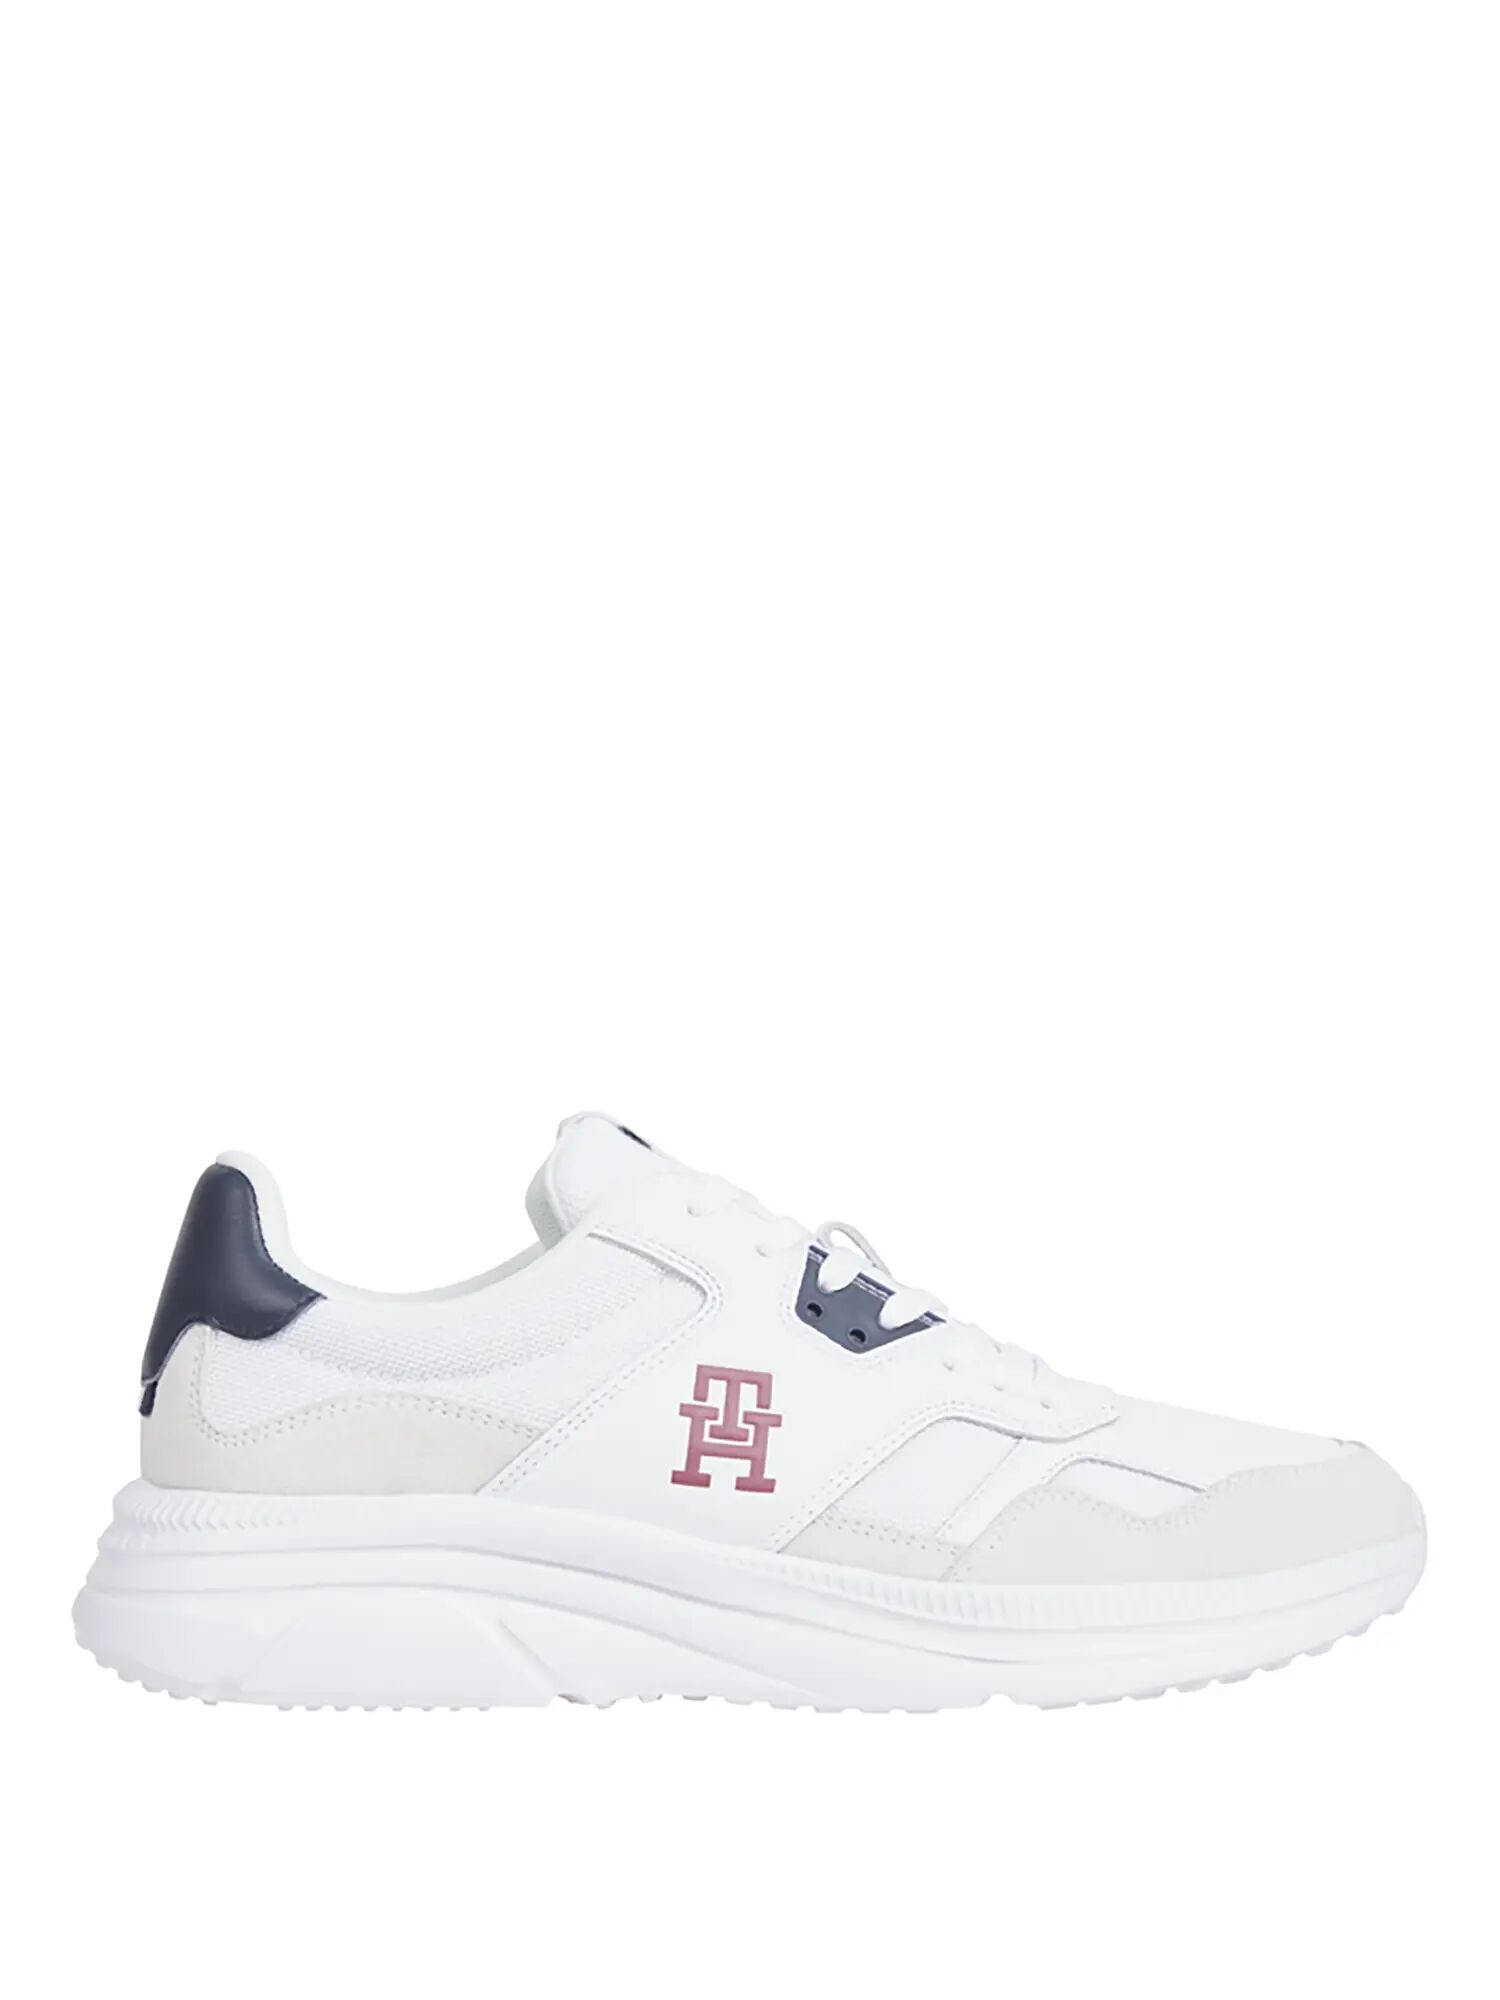 Tommy Hilfiger Sneakers Bianche Uomo BIANCO 40